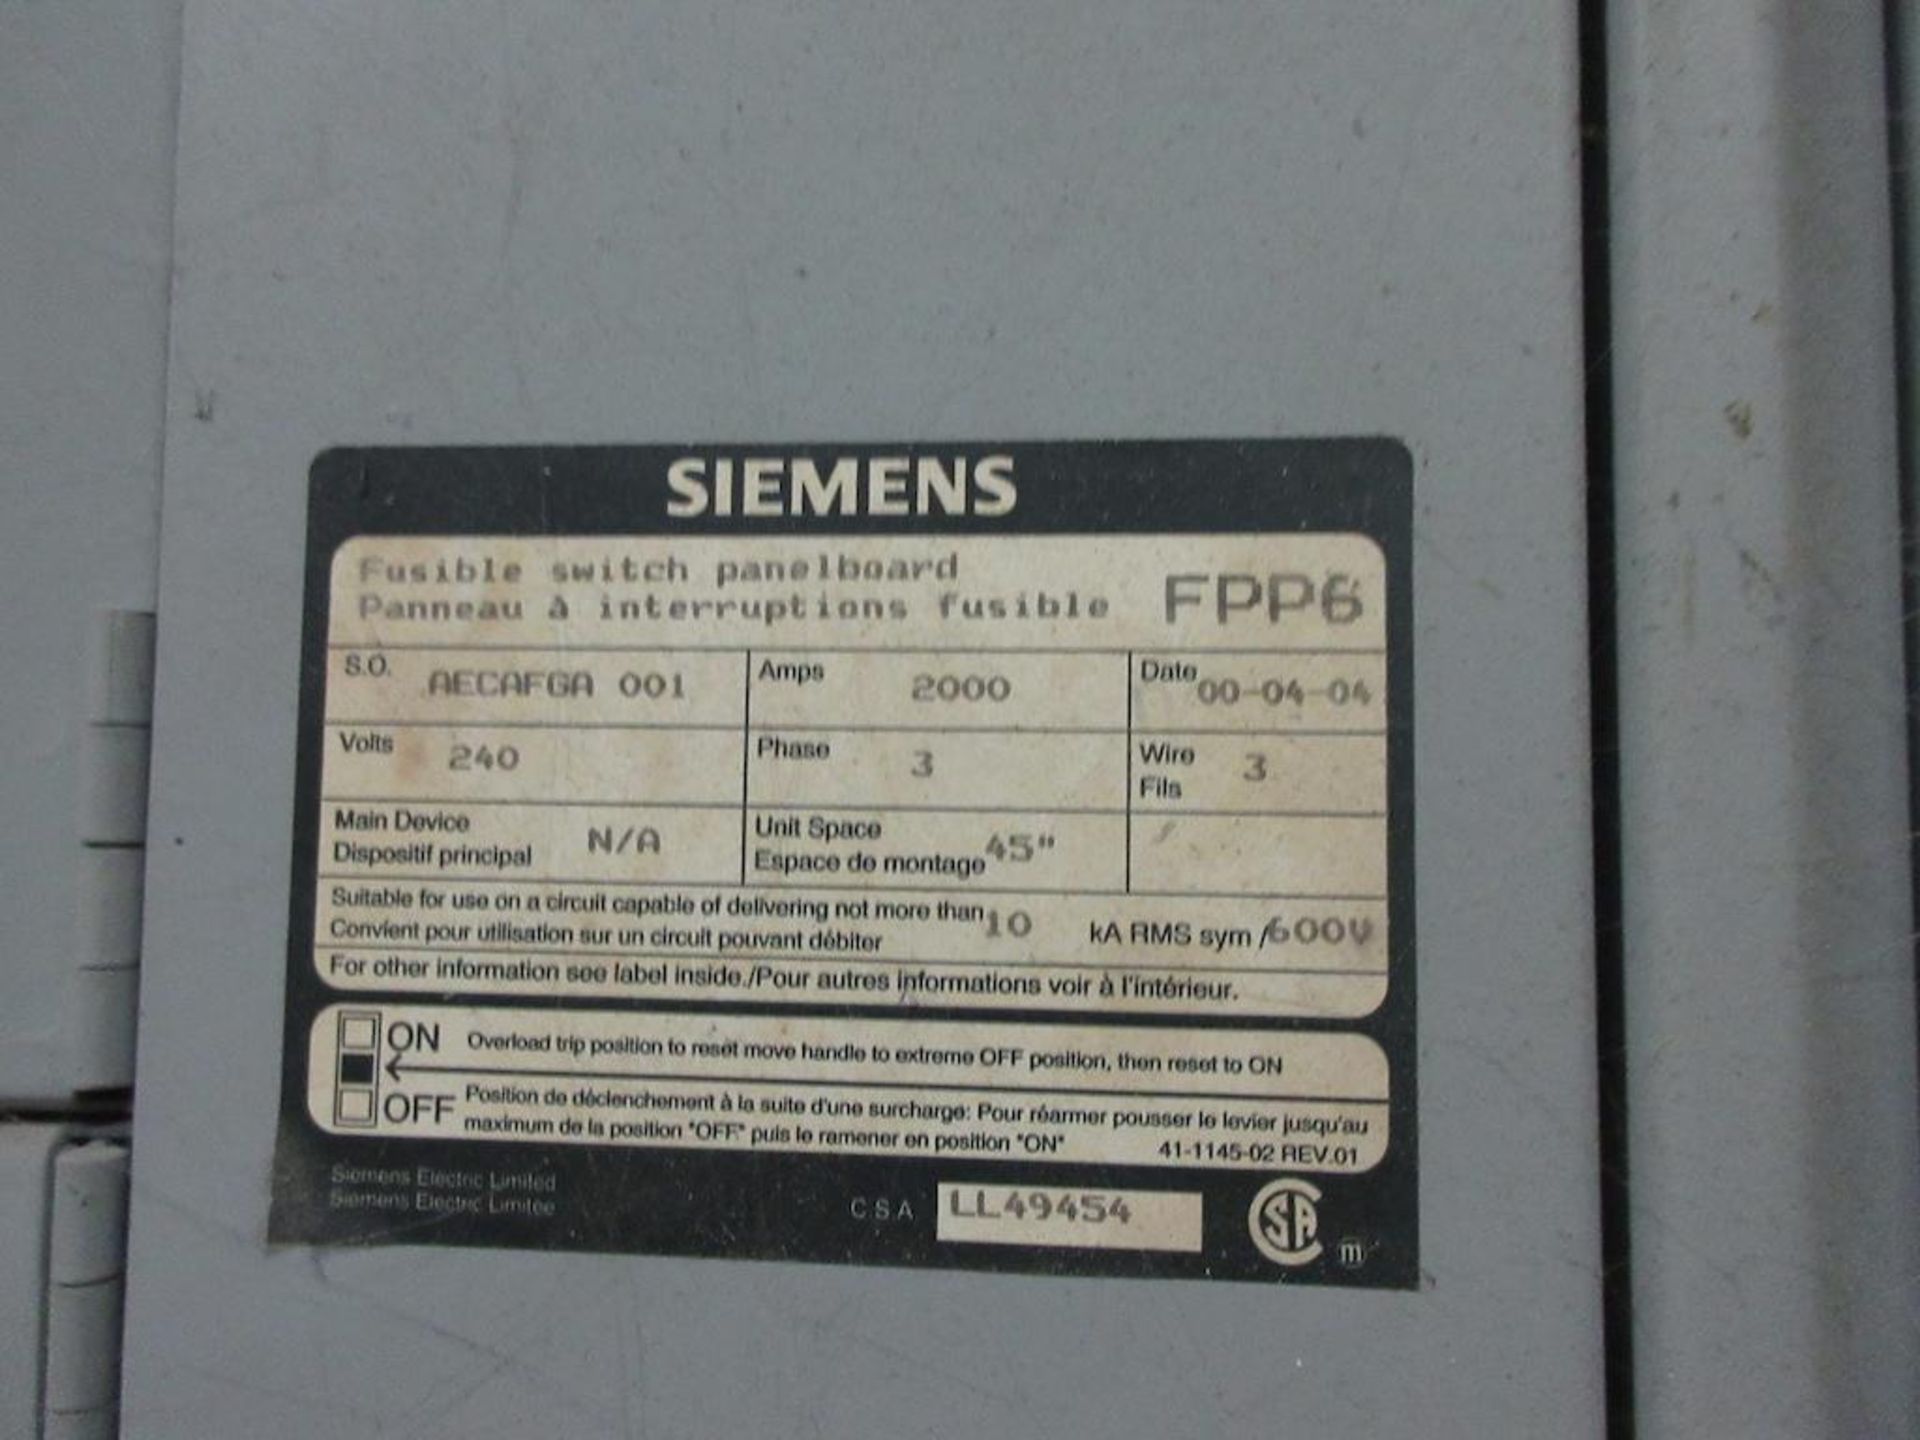 Siemens Fusible switch panelboard, 2000 amp, 347/600 volts, includes JVC top transformer, 600V, Styl - Image 2 of 7